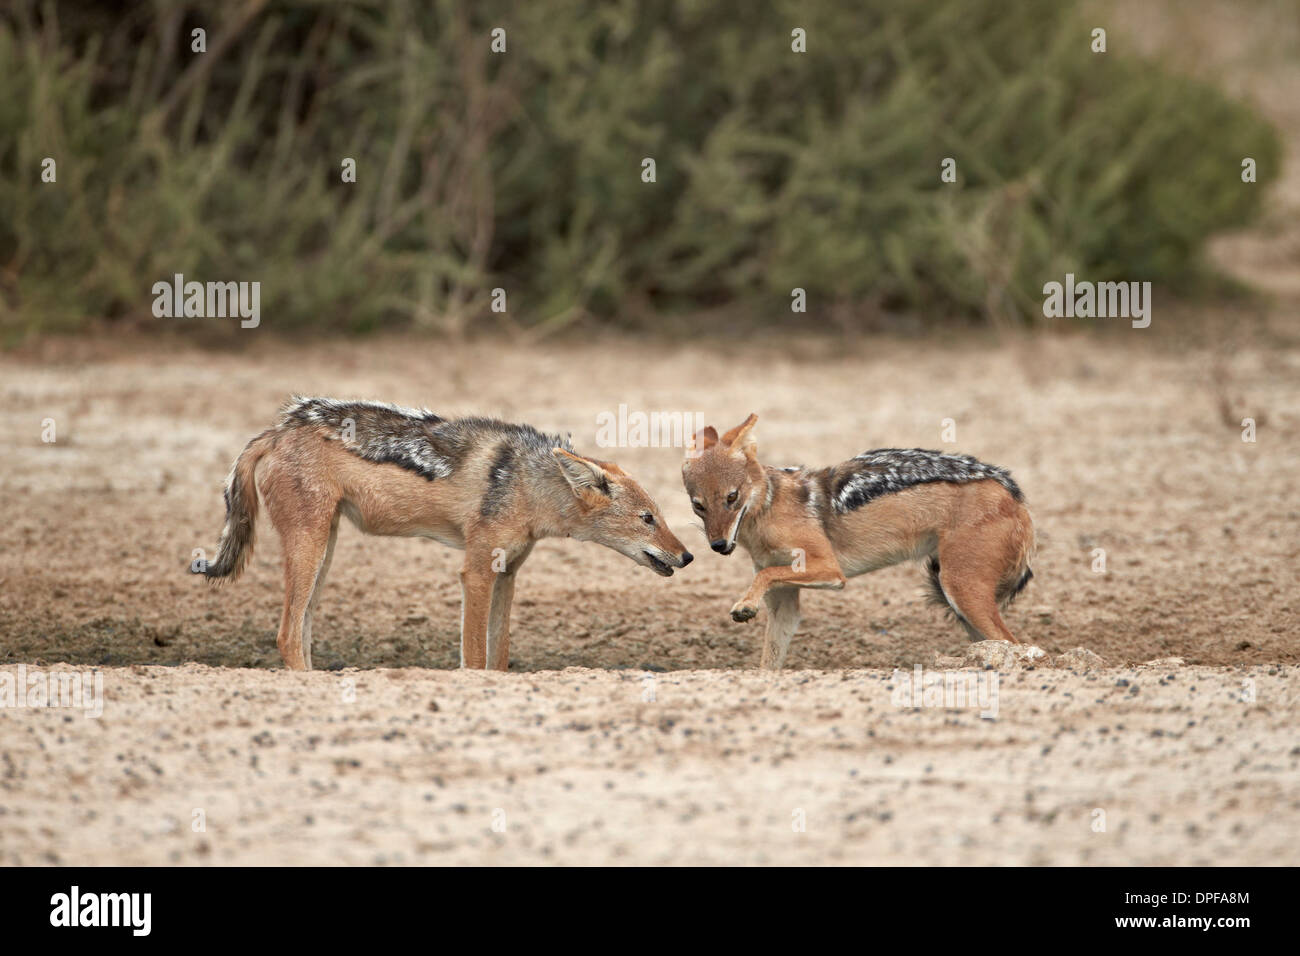 Two black-backed jackal (Canis mesomelas), Kgalagadi Transfrontier Park, South Africa Stock Photo